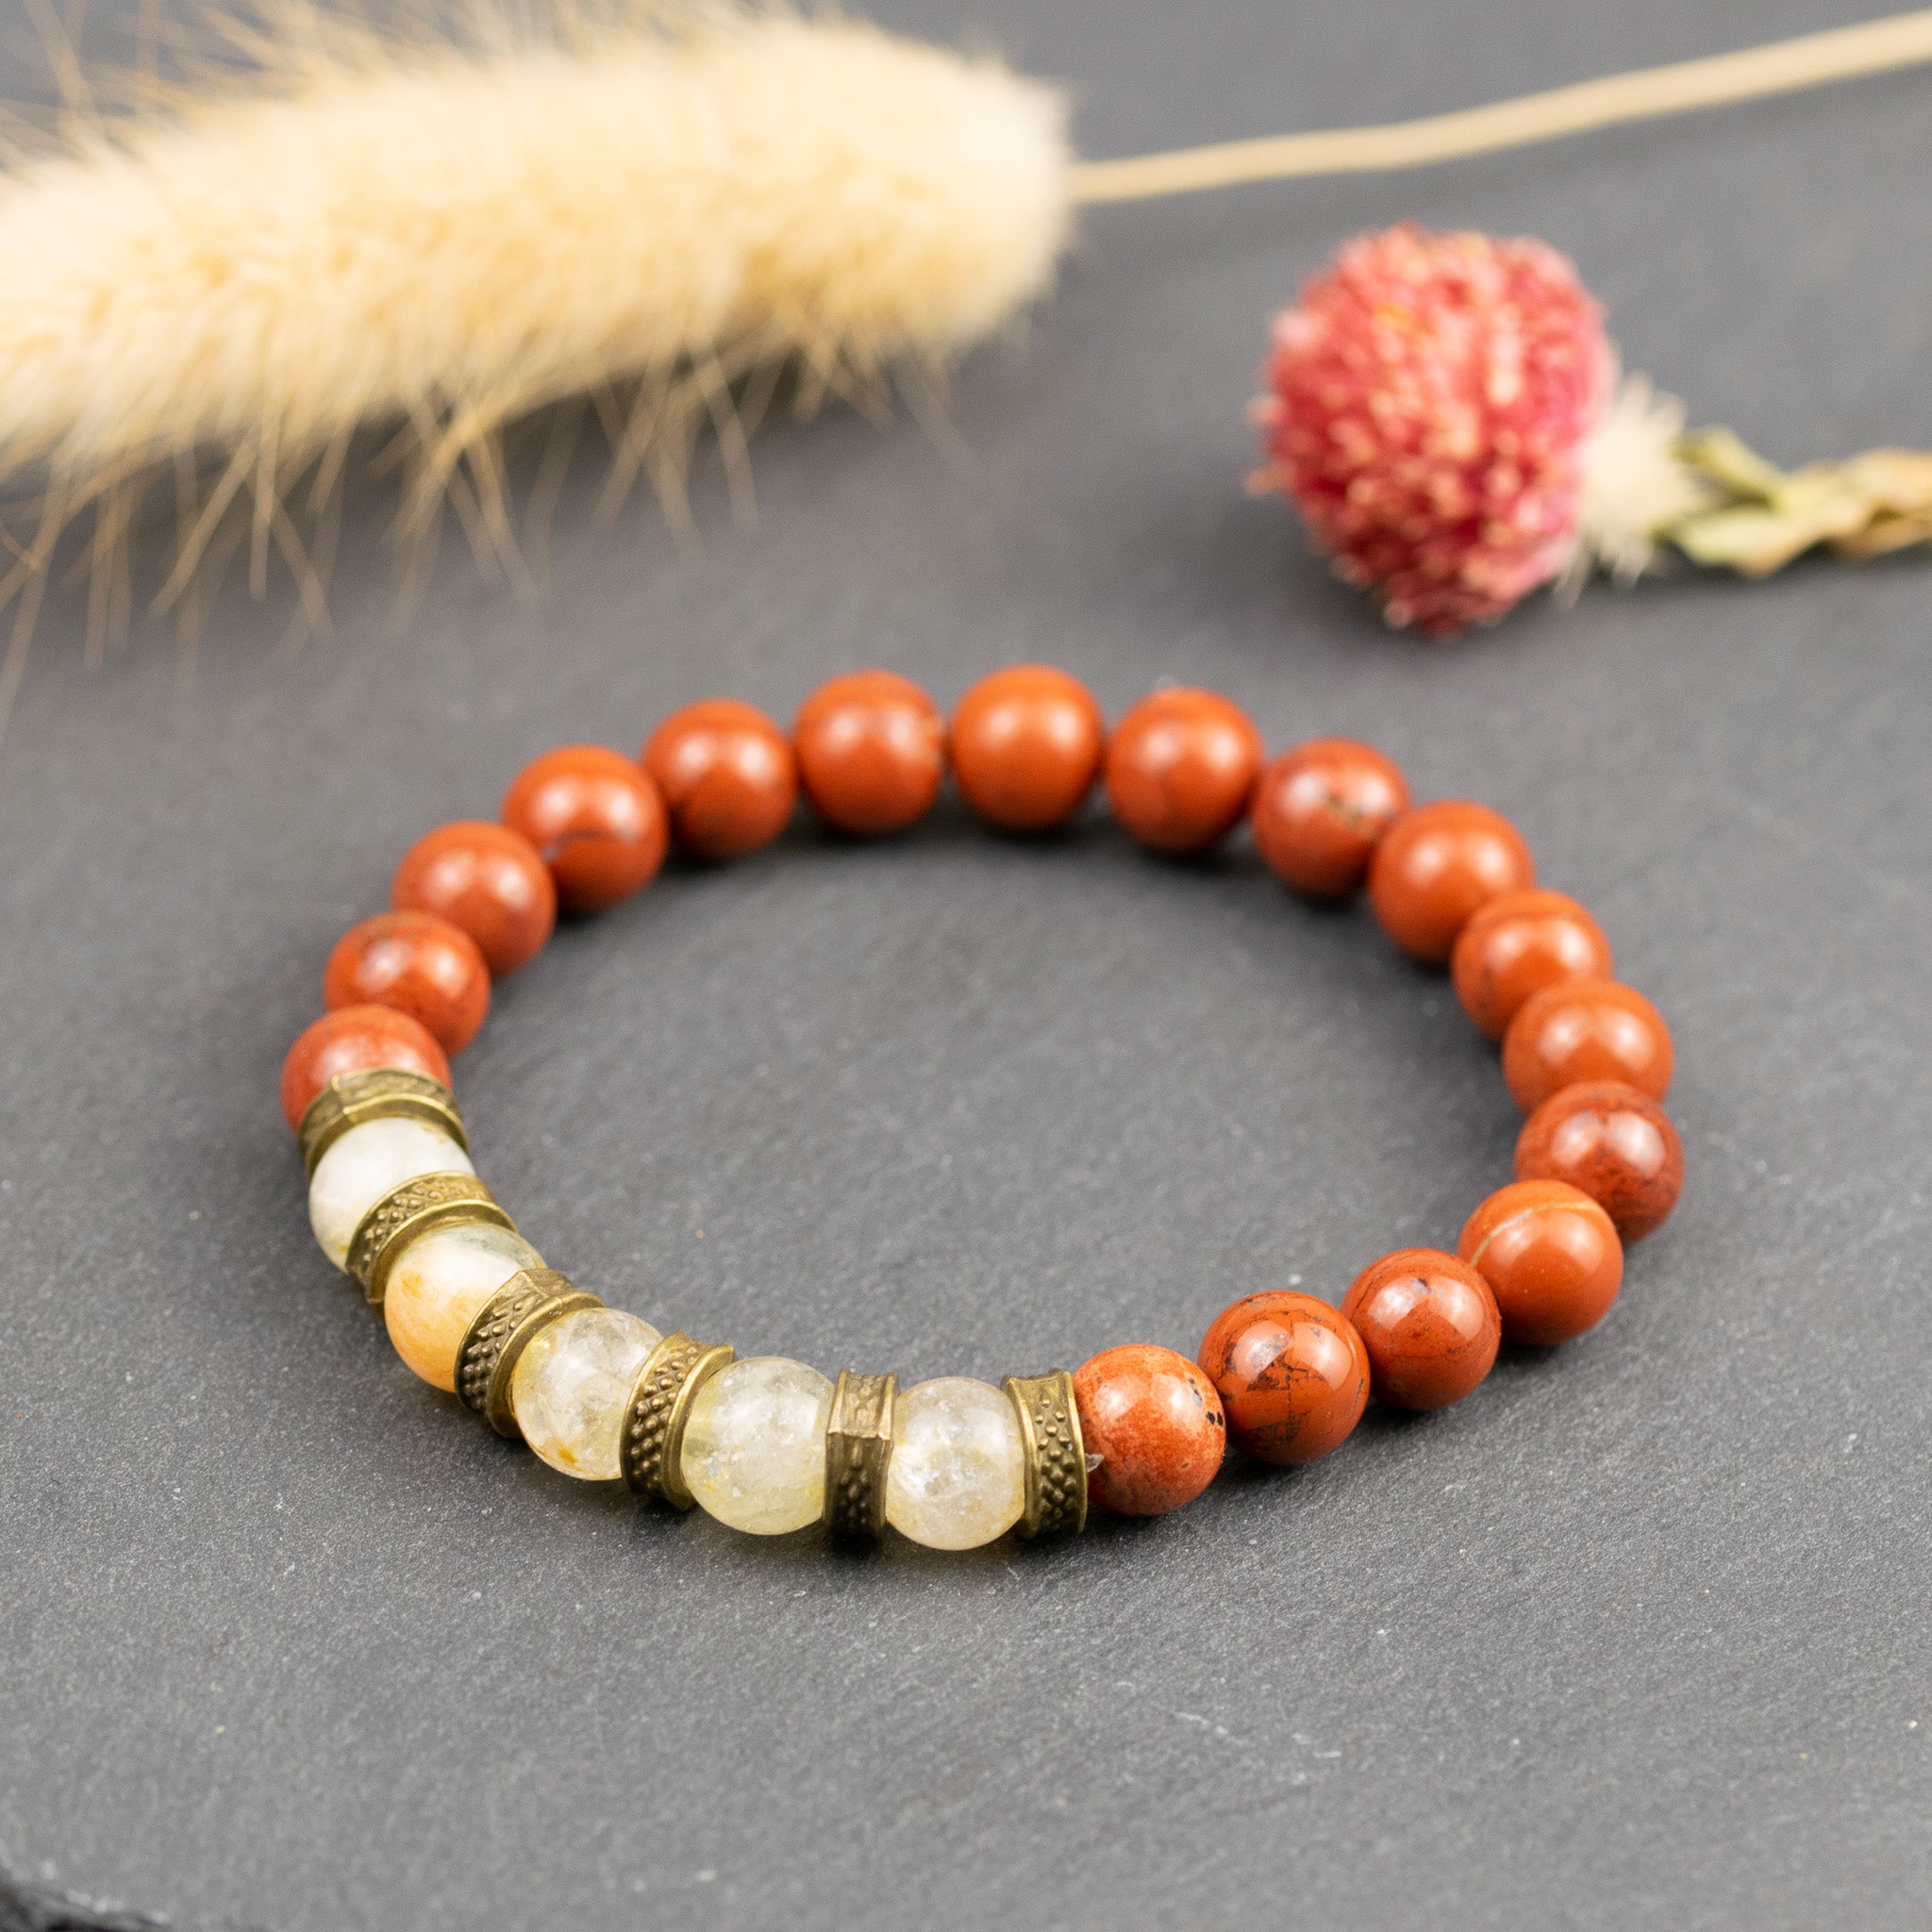 Red Jasper & Citrine for Succcess, Stability and Enthusiasm: Aries, Cancer, Gemini, Leo, Libra